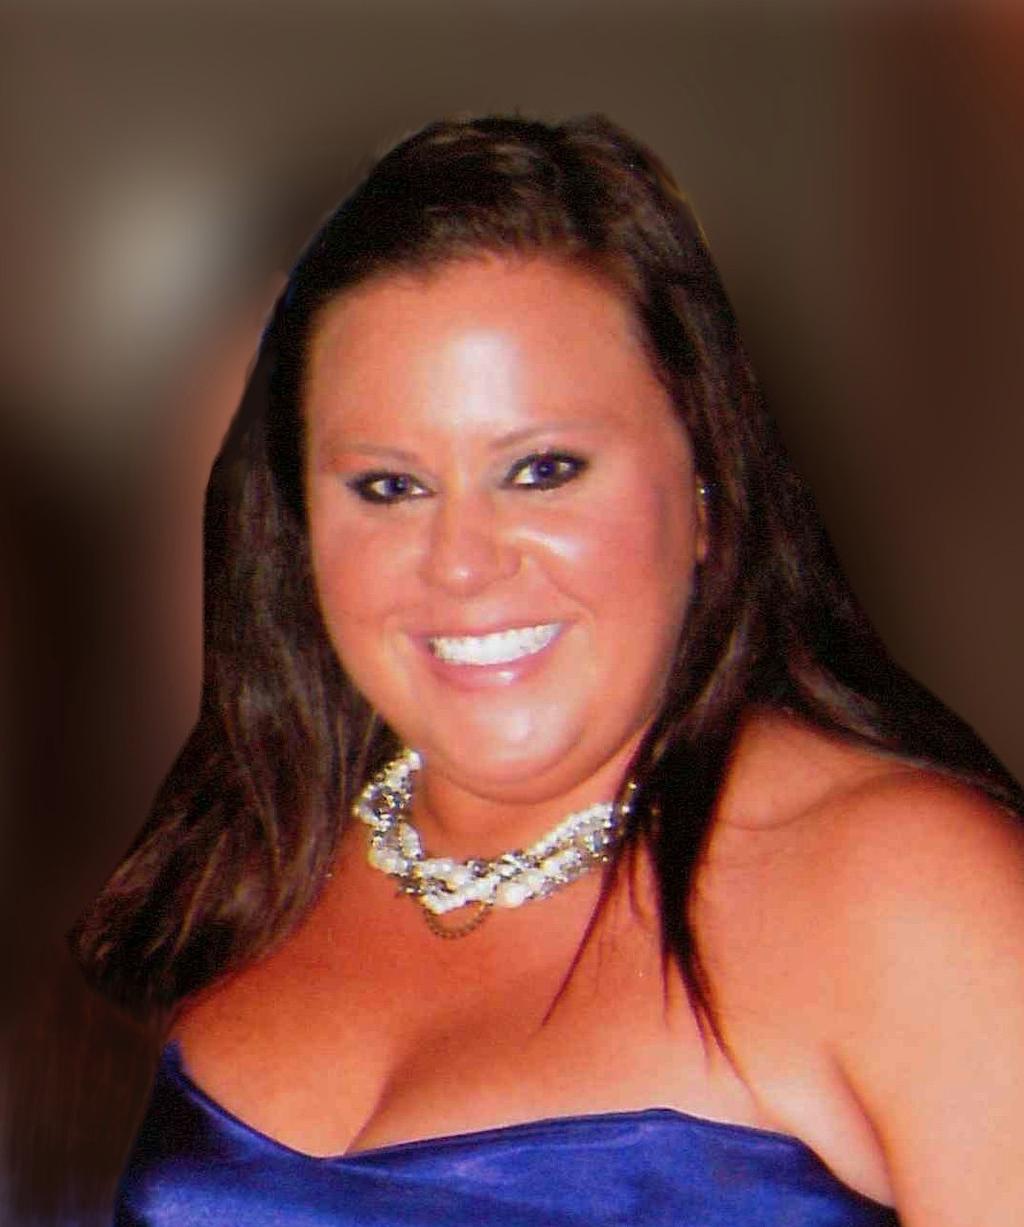 PHONE: (972) 562-2601 Katherine Ann Collins February 6, 1986 - February 16, 2014 Katherine Ann Collins, incredibly loving daughter, sister, niece, and friend passed away at the age of 28 on Sunday,